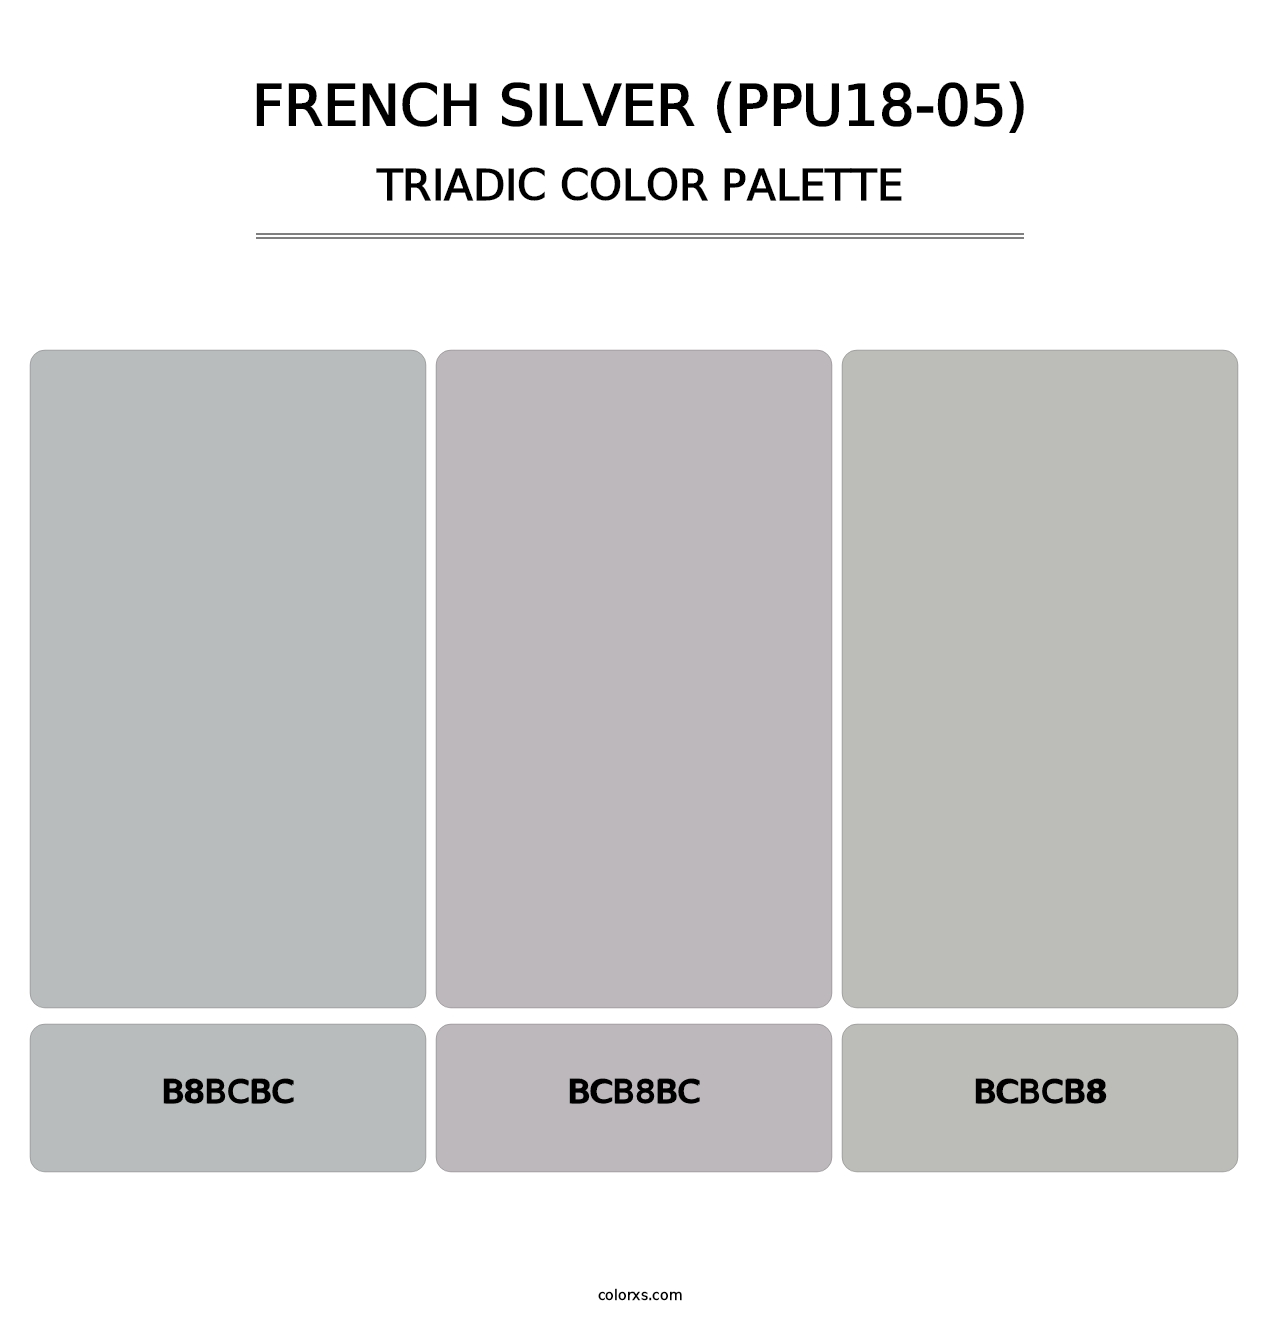 French Silver (PPU18-05) - Triadic Color Palette